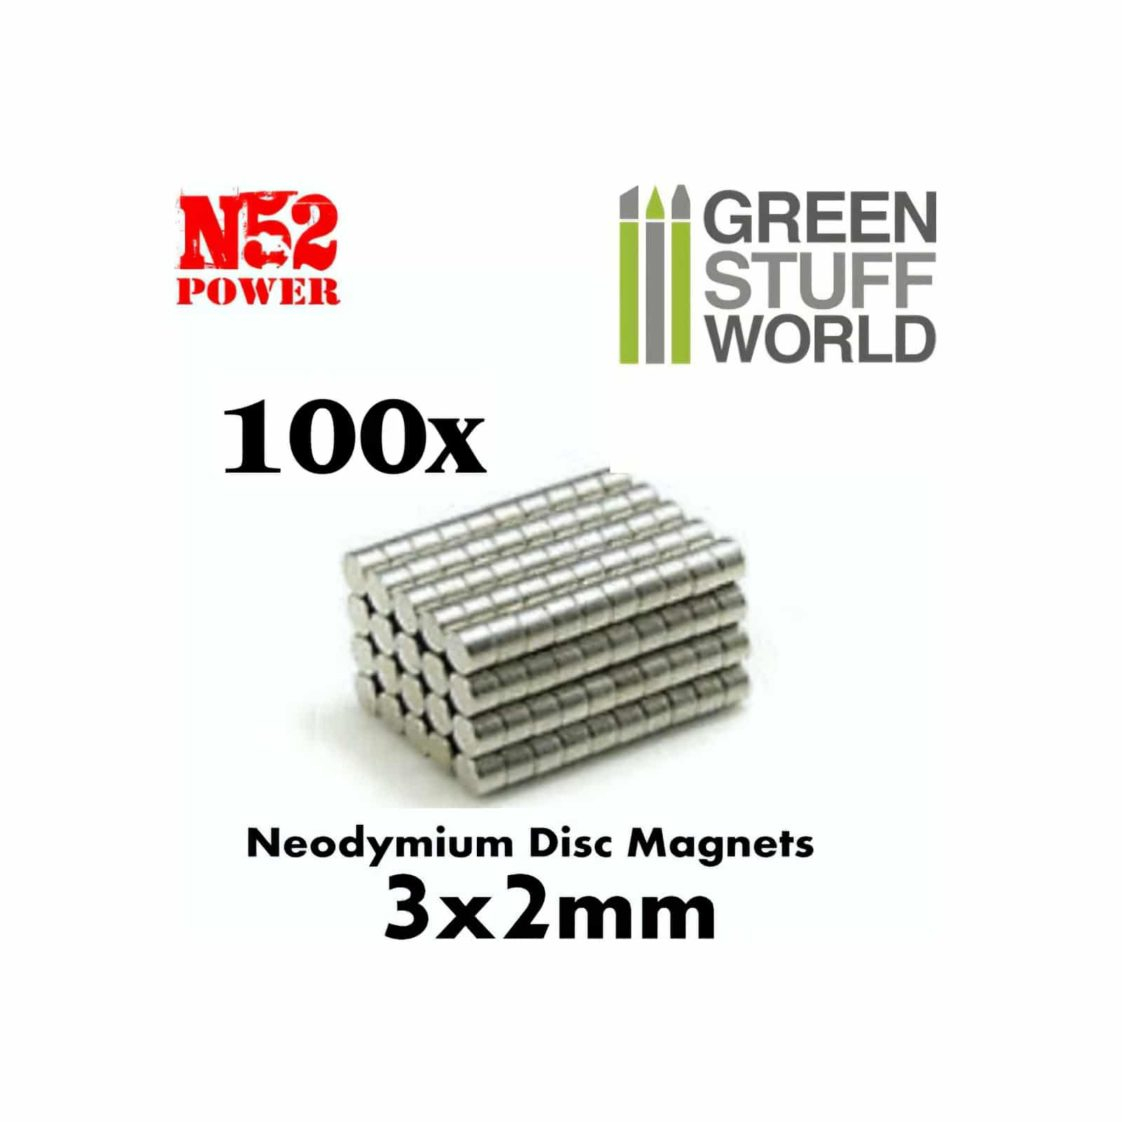 Details about   N52 3x2mm 